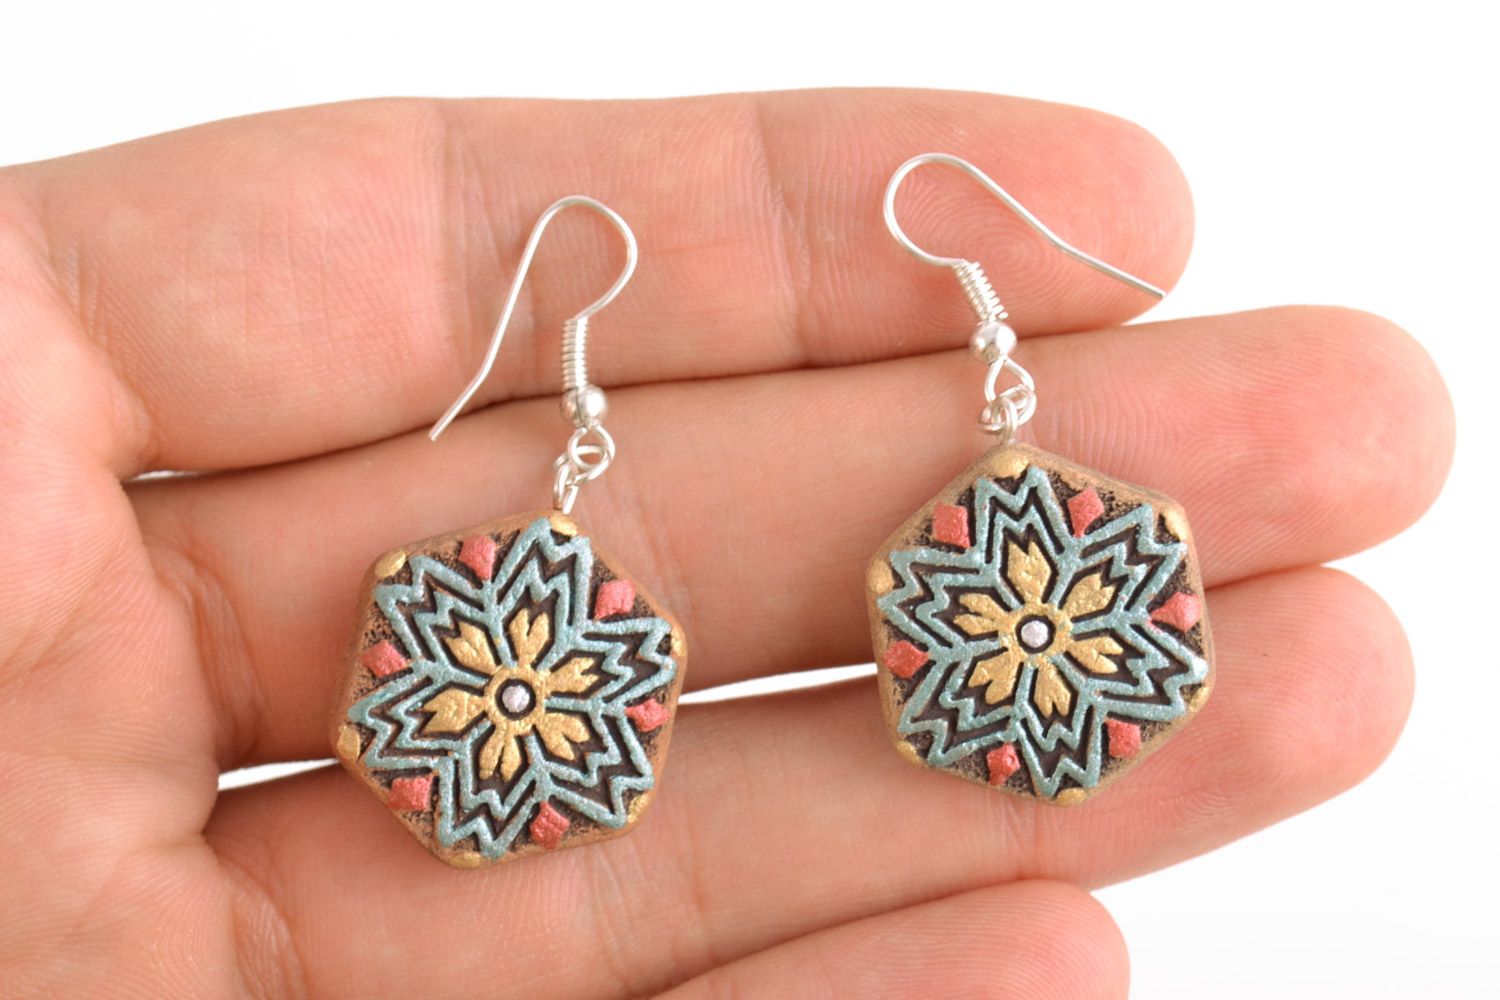 Handmade ceramic dangling earrings ornaments with acrylic paints in ethnic style photo 2